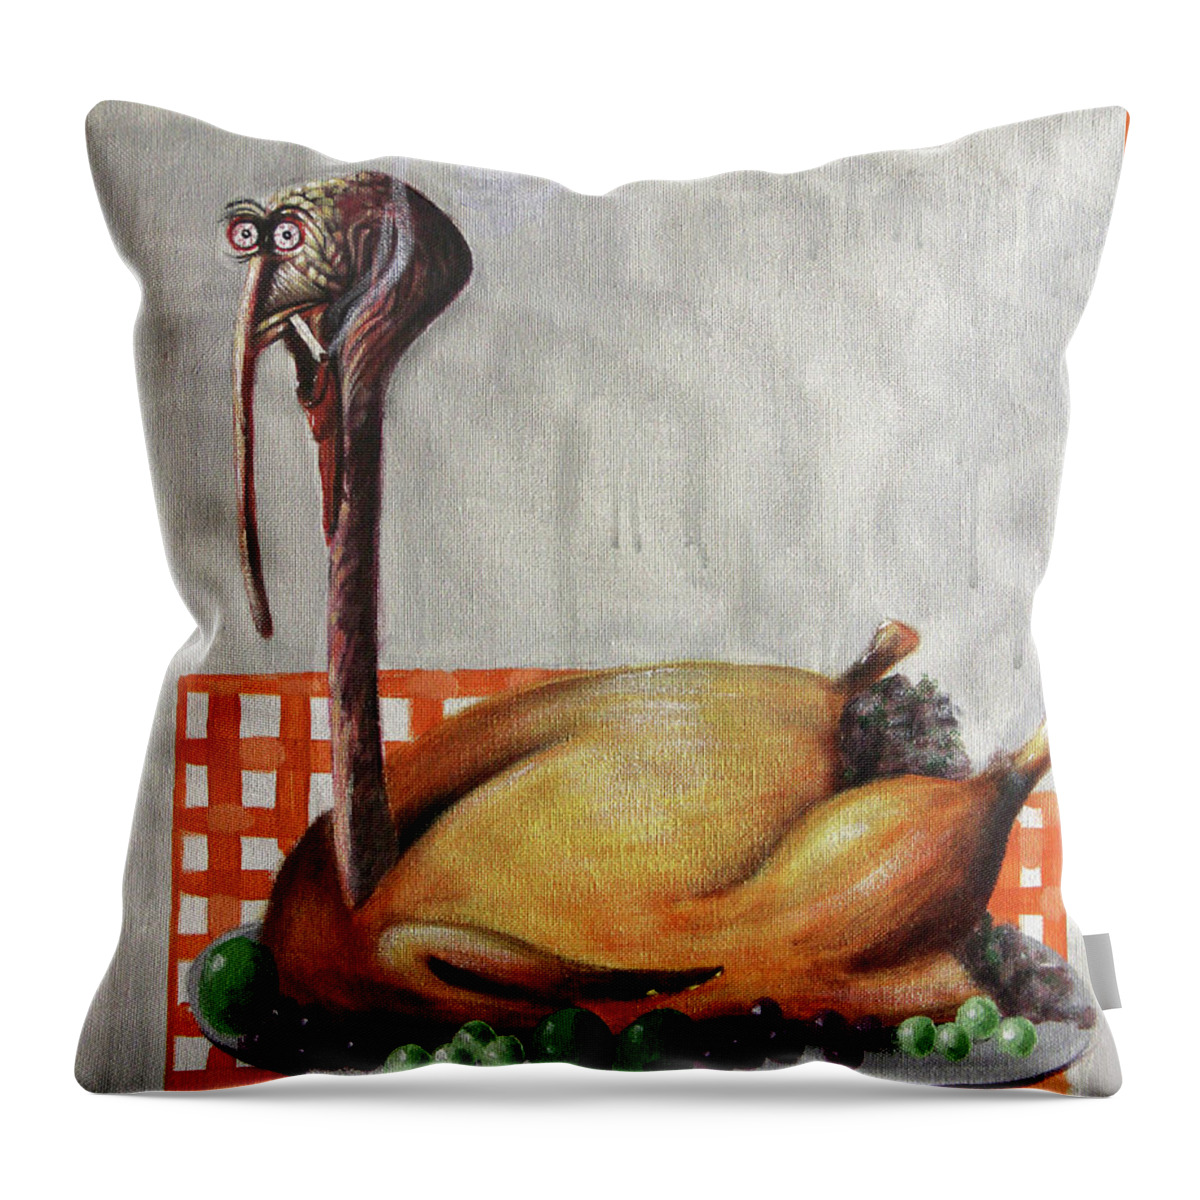  Baked Turkey Throw Pillow featuring the painting Baked Turkey by Anthony Falbo